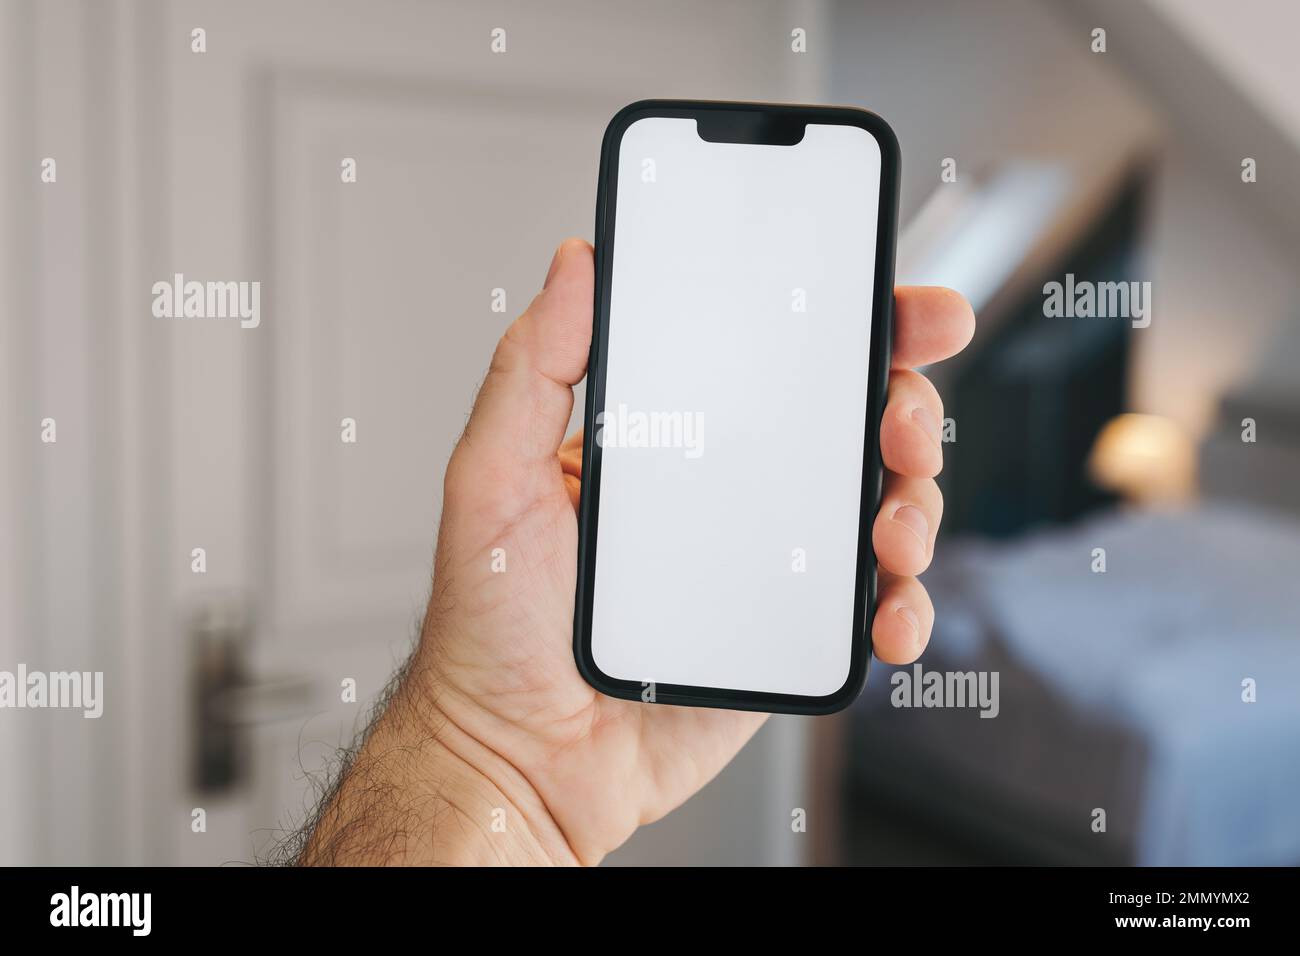 Tourist in hotel bedroom holding smartphone with blank mockup screen for booking and reservation app or accommodation rating service Stock Photo